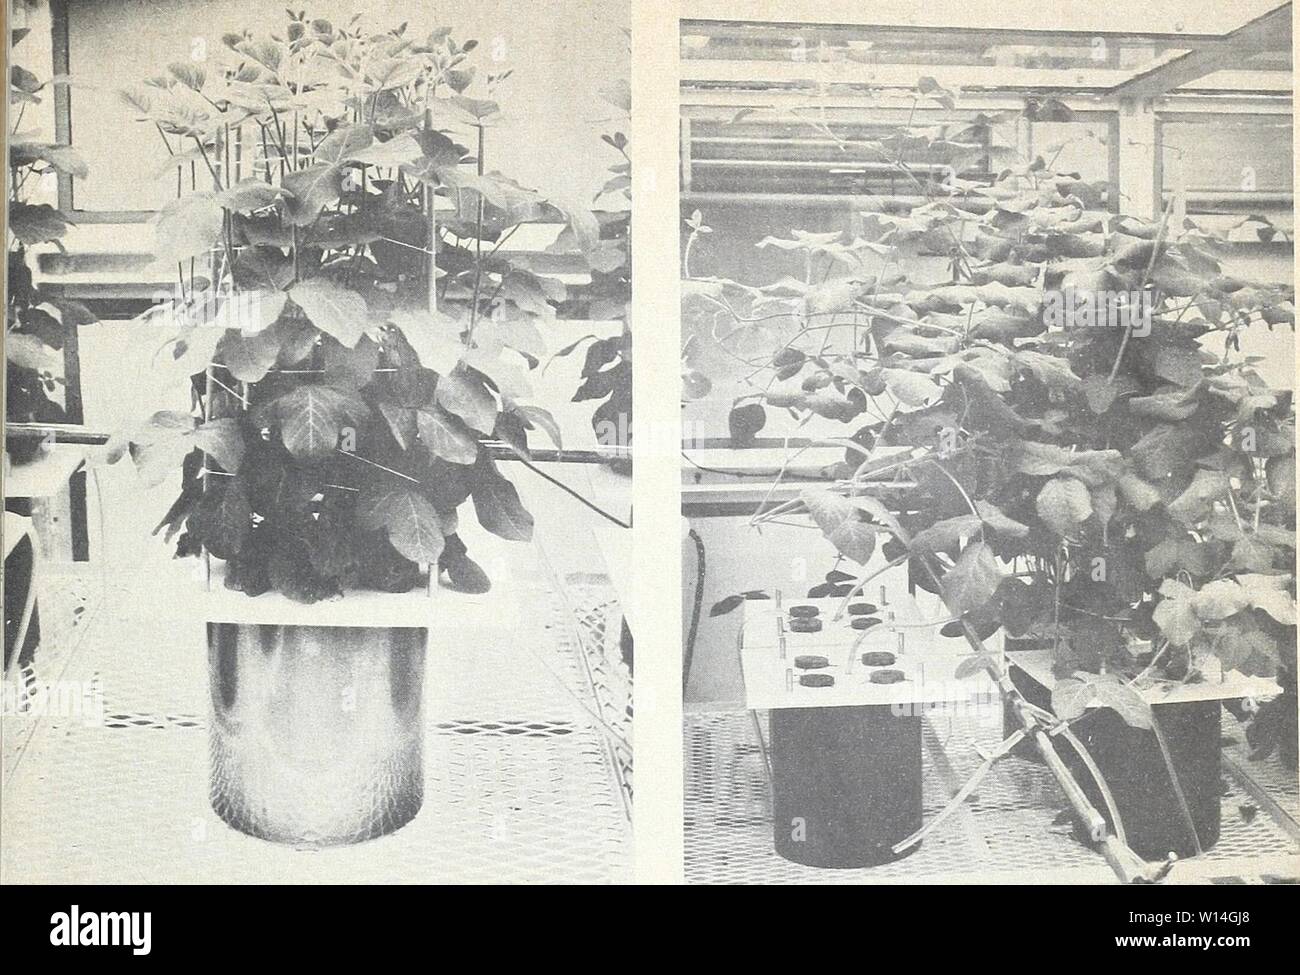 Archive image from page 14 of Design and operation of a. Design and operation of a carbon-14 biosynthesis chamber . designoperationo911smit Year: 1962  Figure 12 —Carbon-14 labeled soybean plants approach- Figure 13.—Carbon-14 labeled soybean plants approach- ing blossoming, growing in the biosynthesis chamber. ing maturity, growing in the biosynthesis chamber. Figures 11, 12, and 13 show carbon-14 tagged soybean plants growing in the biosynthesis cham- ber and the excellent growth that was obtained. Growth of Corn Two crops of corn were grown. The first was growTn about 2 months without radio Stock Photo